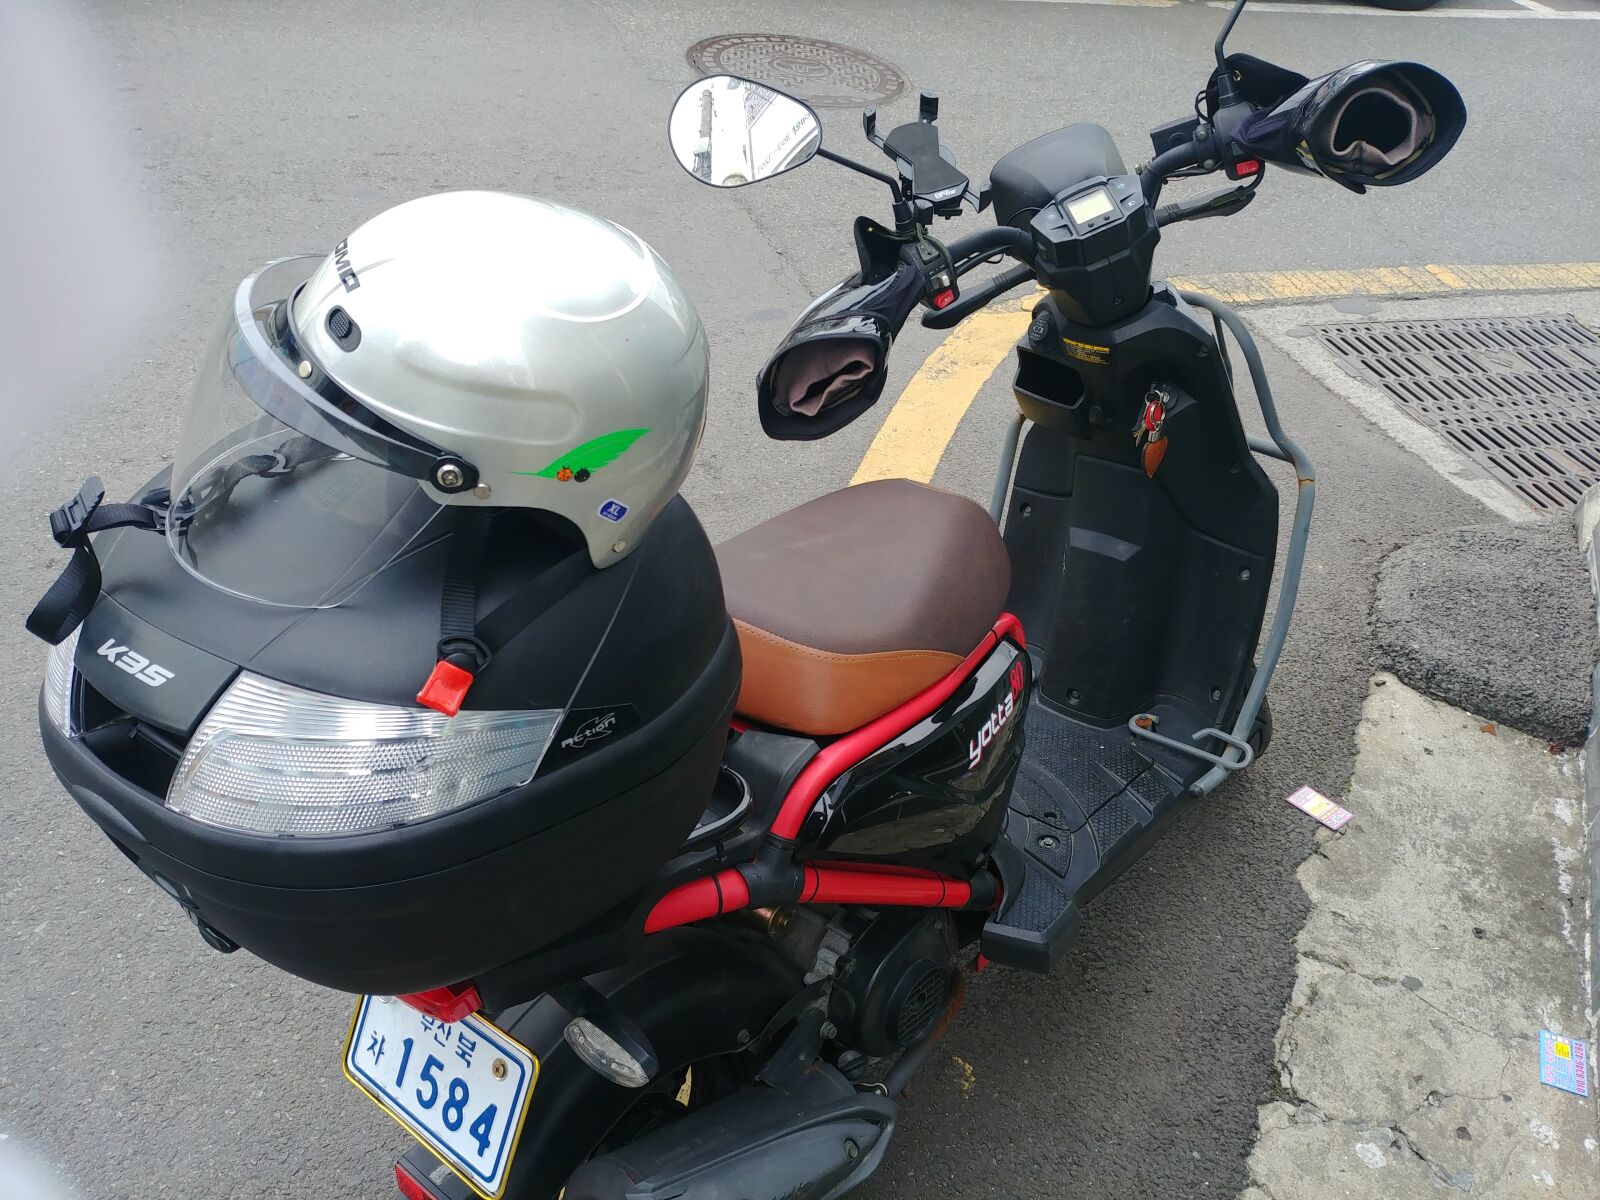 LG G6 sample photo. Scooter, motorcycle, motorbike photography